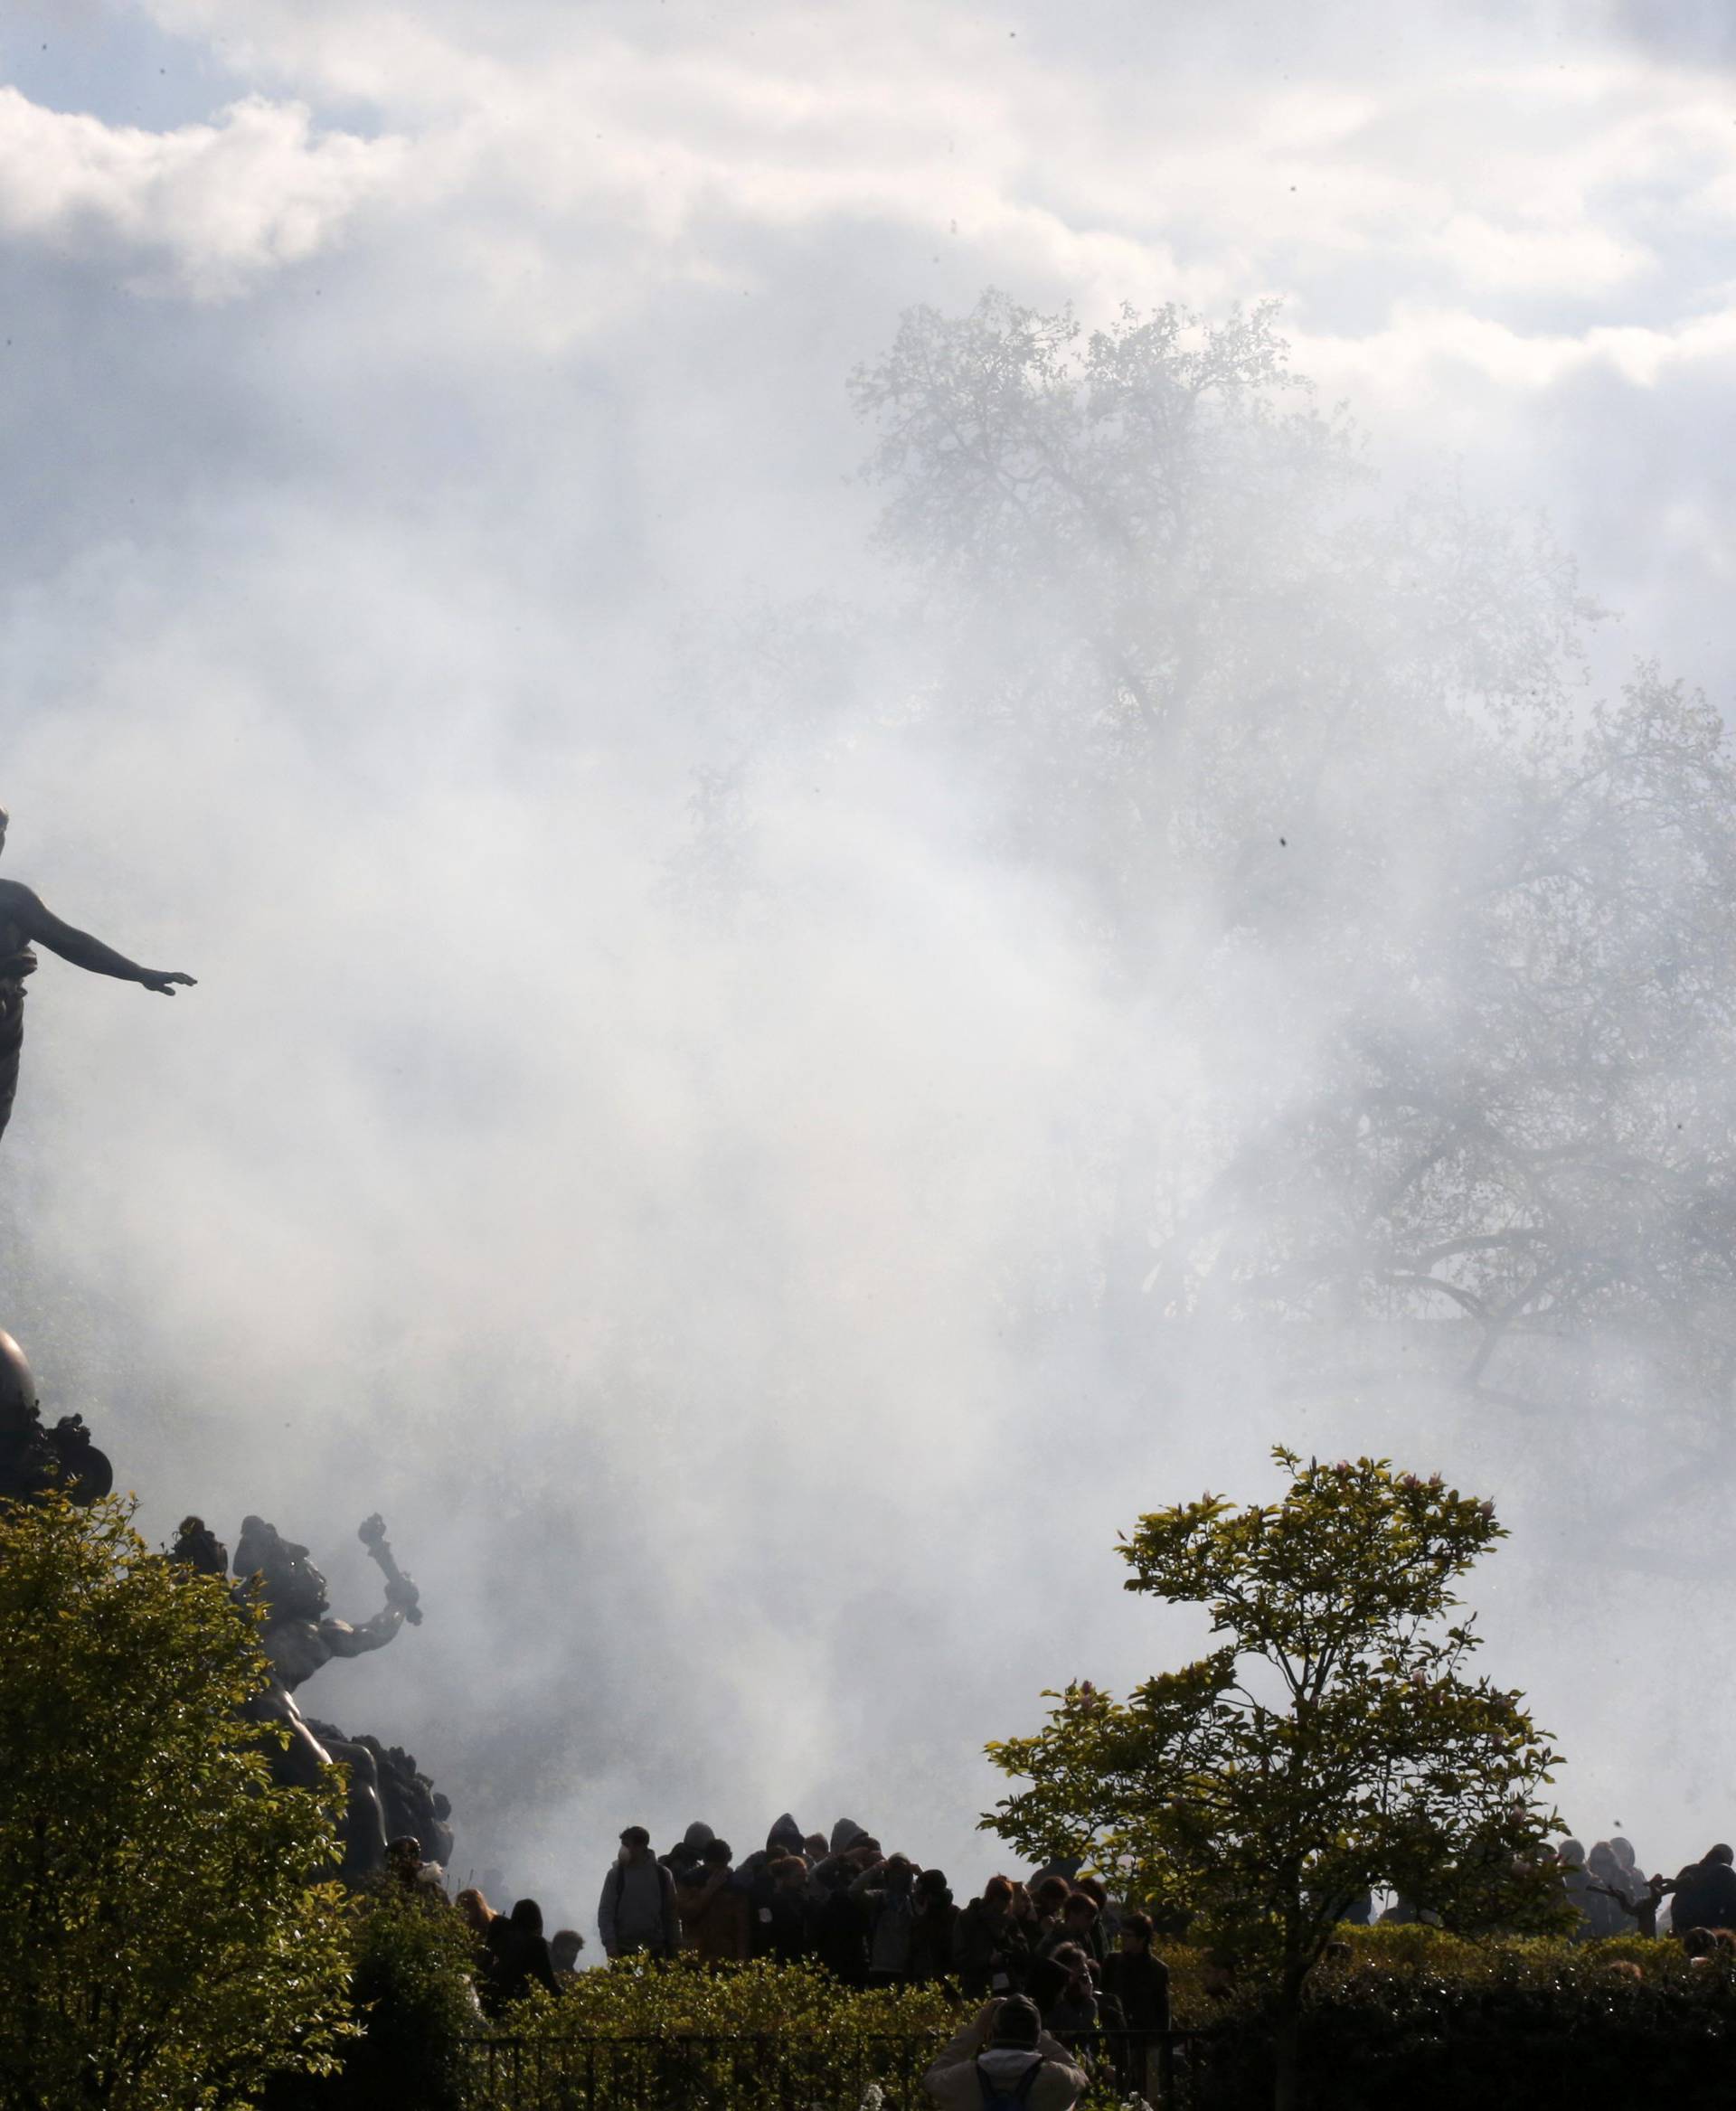 A cloud of tear gas is seen around the statue of the Place de la Nation during clashes between youth and police during a demonstration against the French labour law proposal in Paris